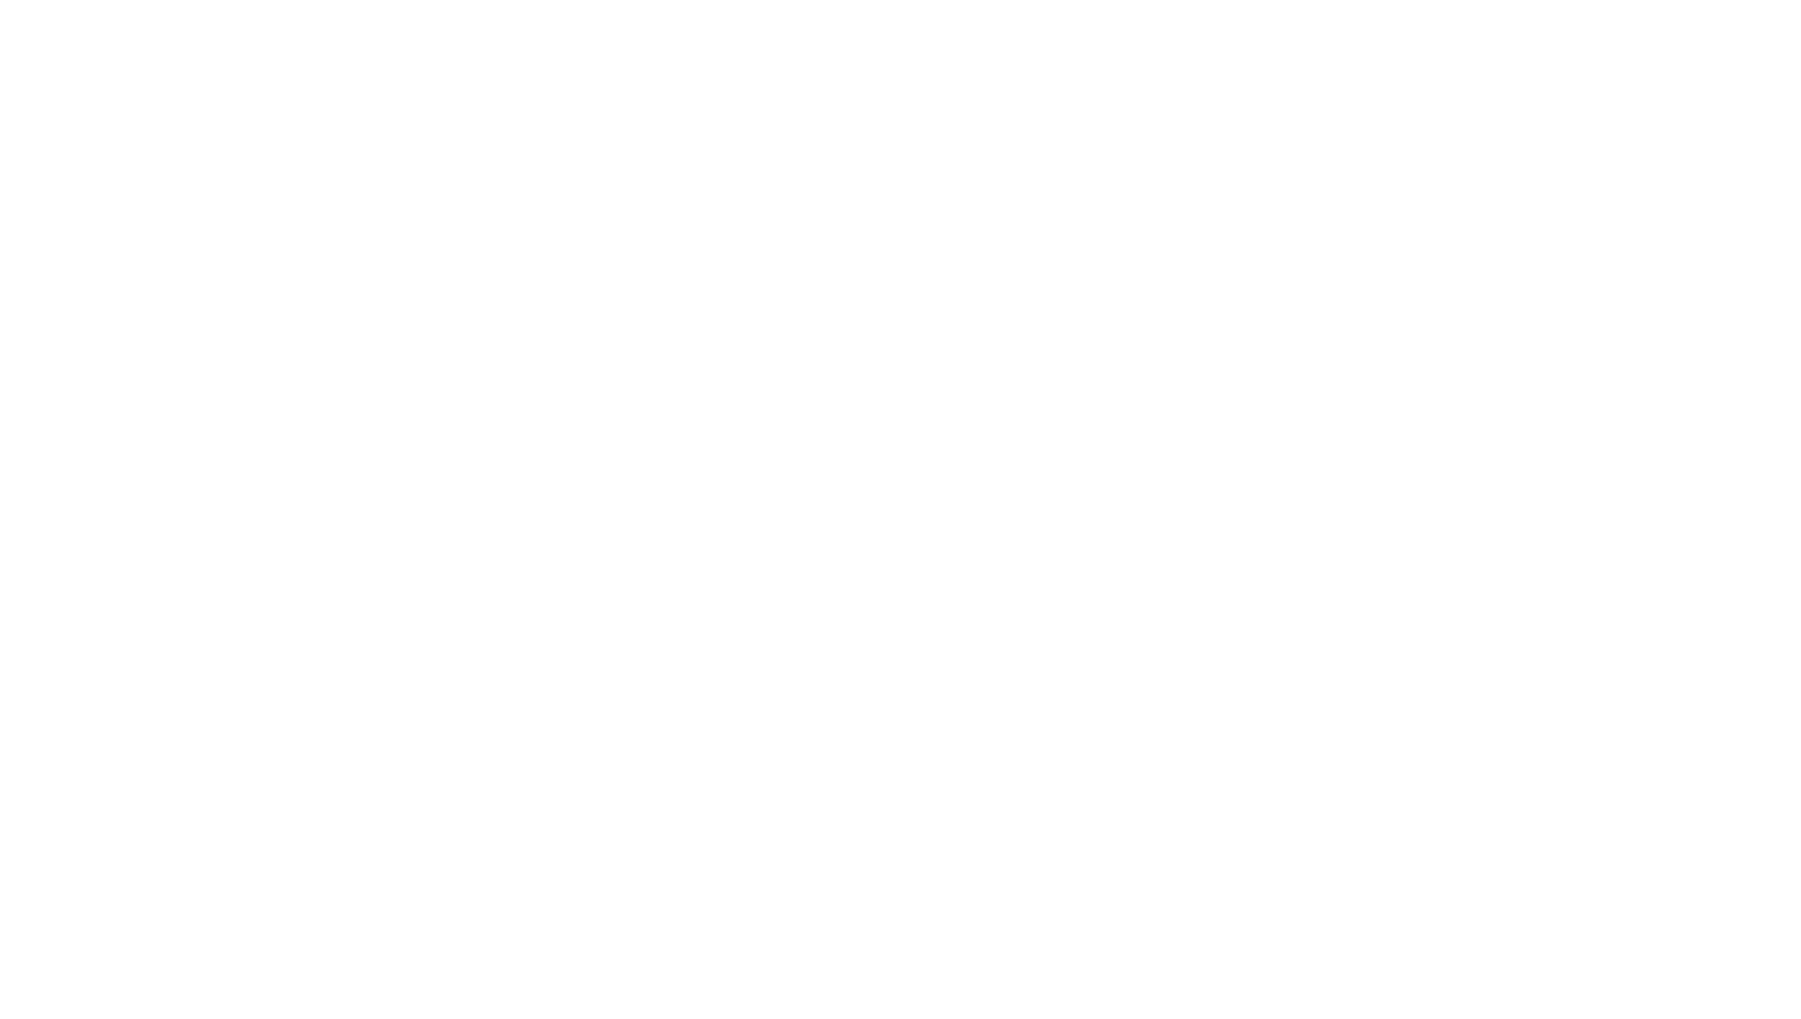 ISO 27001:2013, ISO 27018:2019, and ISO 27017:2015